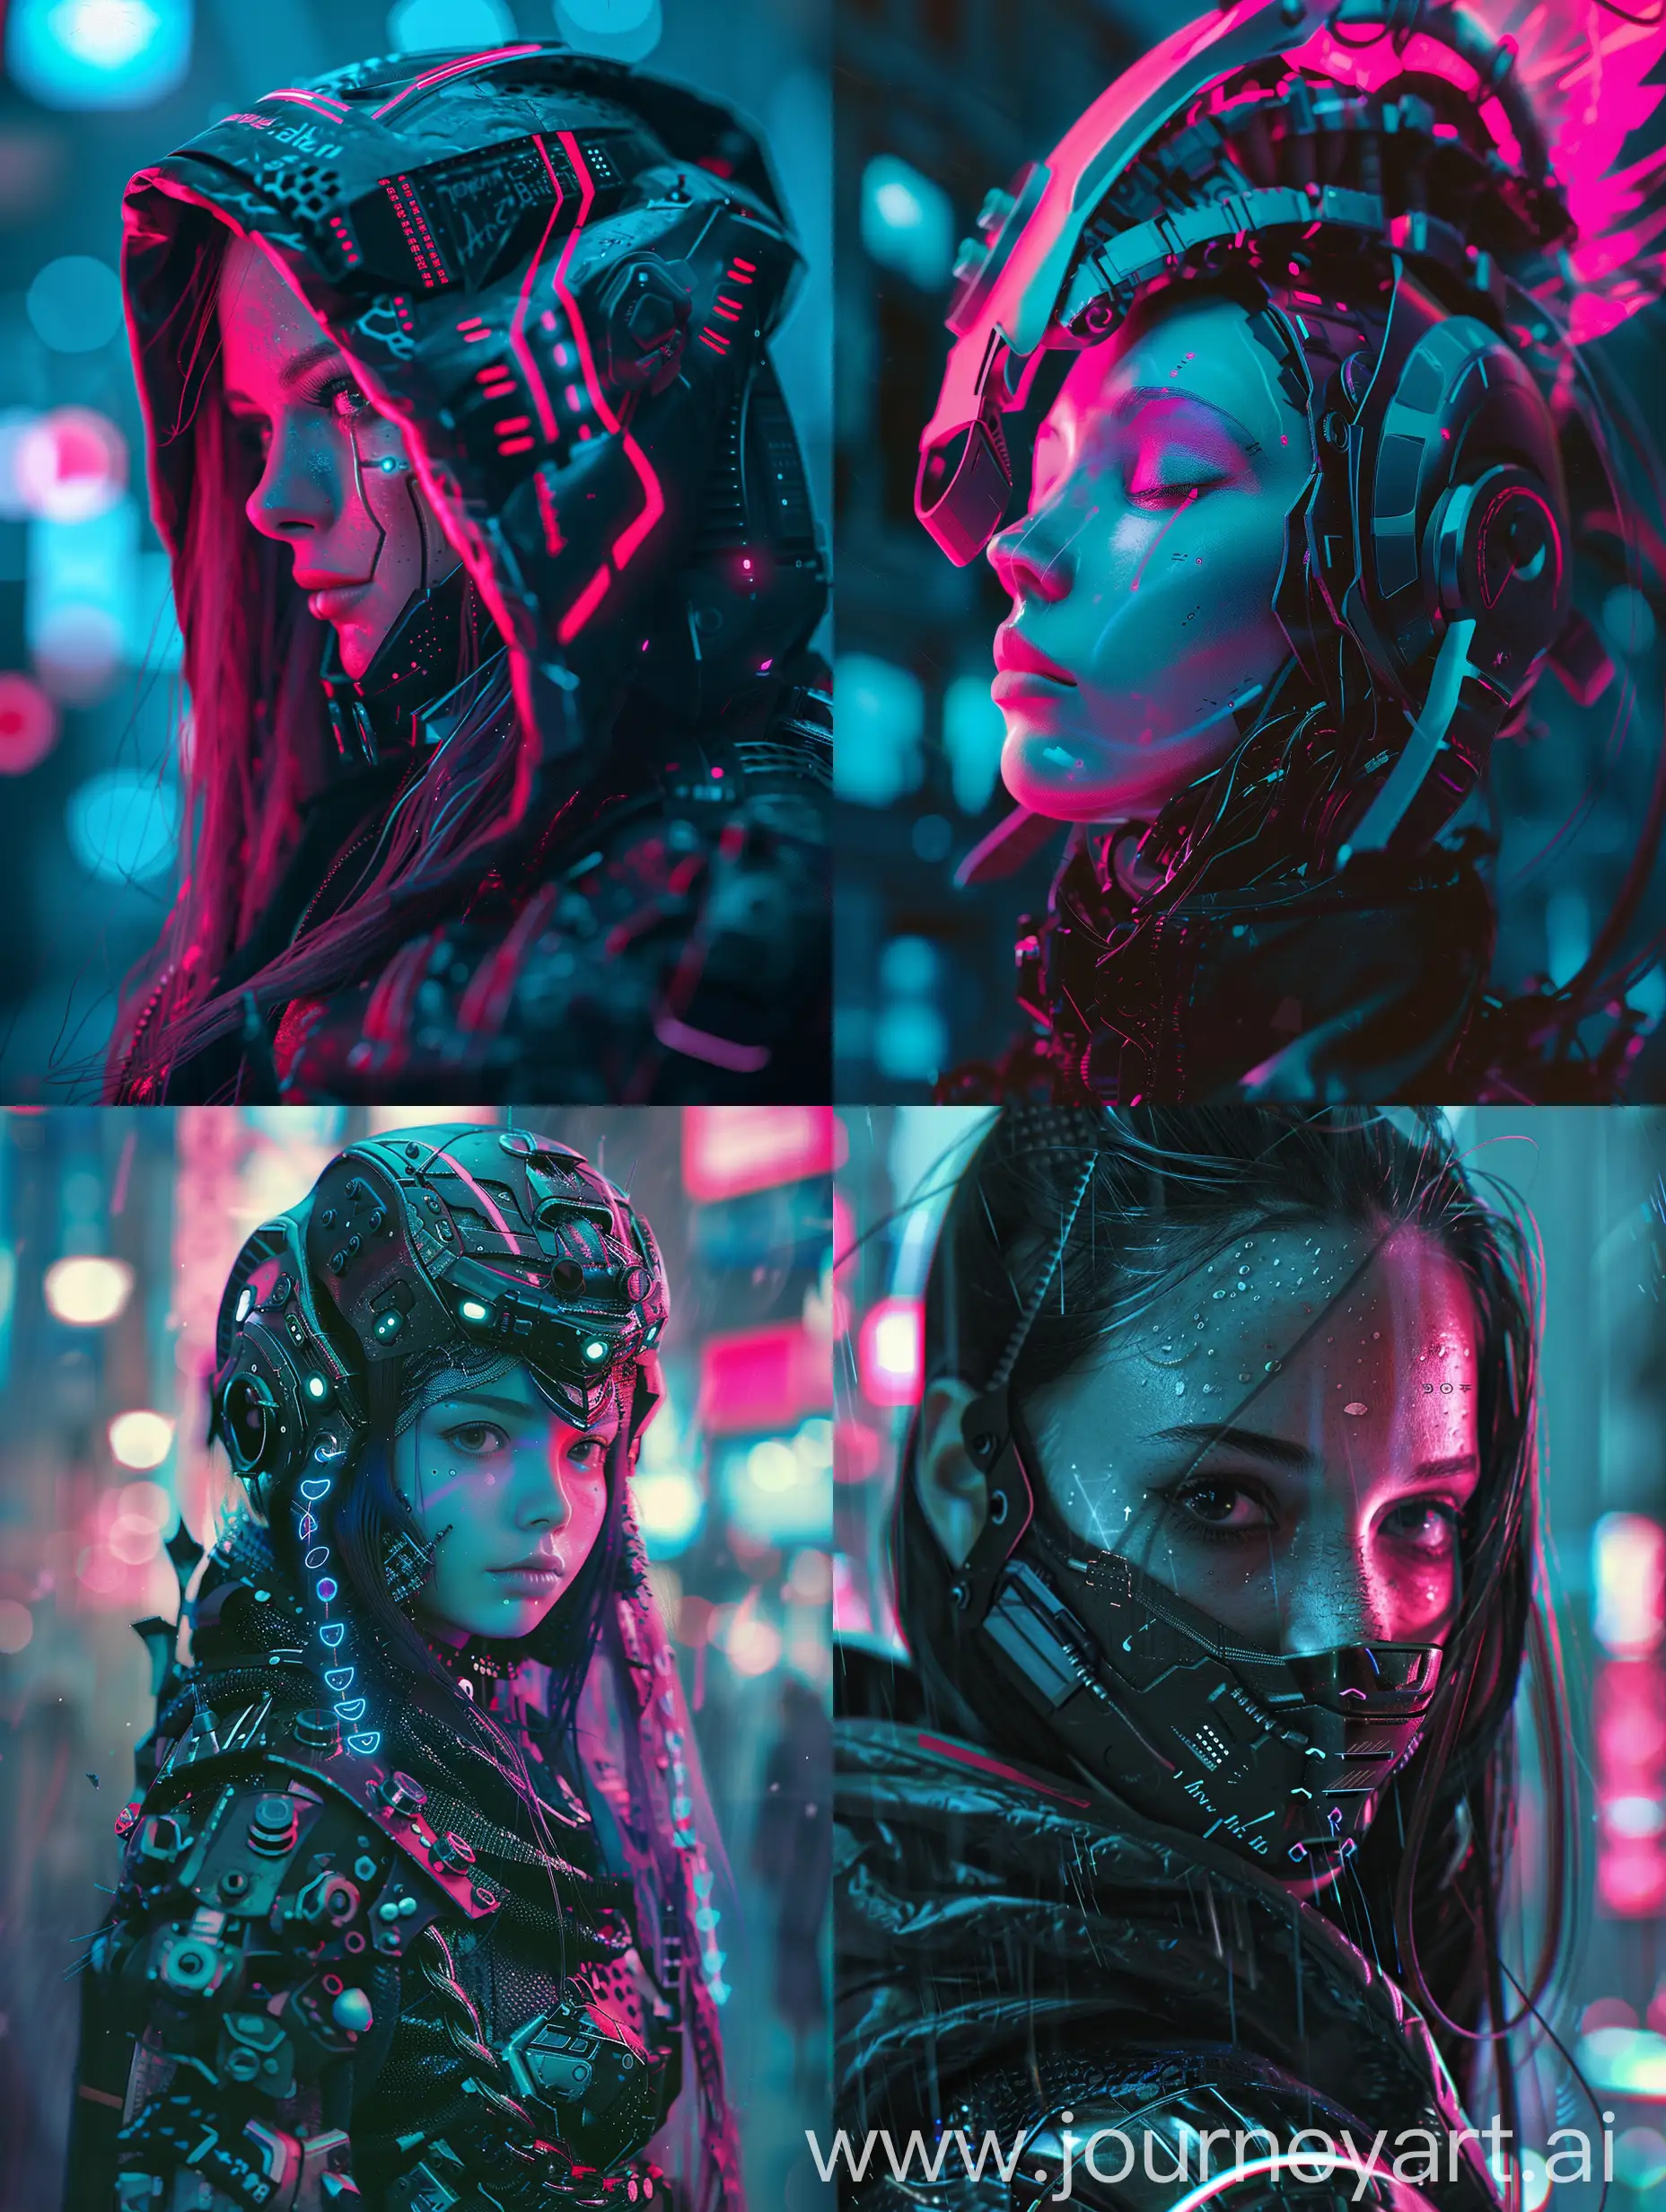 Fairy, beautiful, darkness, potrait, realistic, high detailed, cyberpunk concept, with subtle pink and blue gradients, futuristic, cyborg, Moonlight enveloping attire tech-punk mech-punk cityscape.